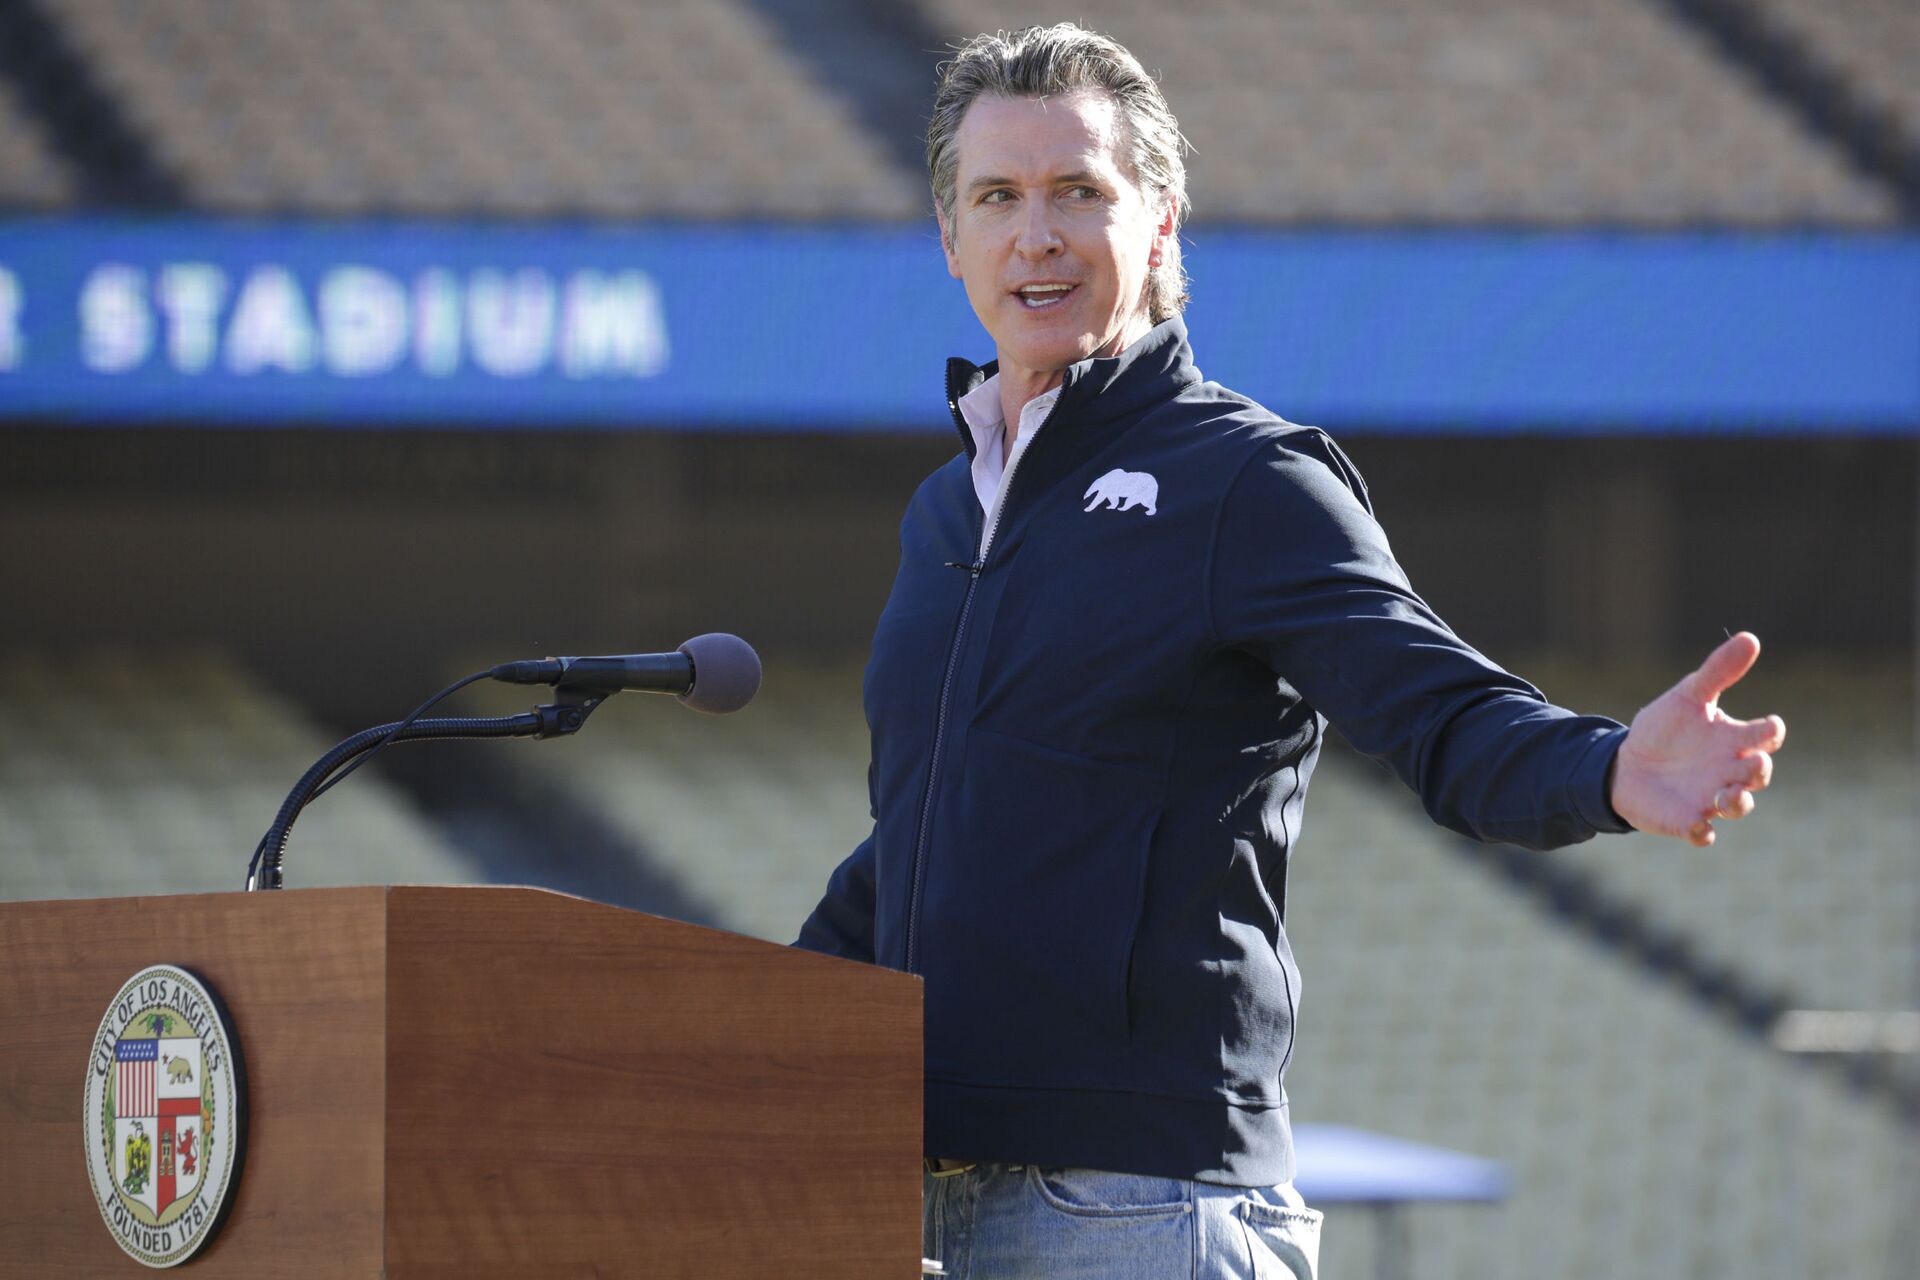 Governor Gavin Newsom addresses a press conference held at the launch of a mass COVID-19 vaccination site at Dodger Stadium on Friday, Jan. 15, 2021, in Los Angeles - Sputnik International, 1920, 07.09.2021